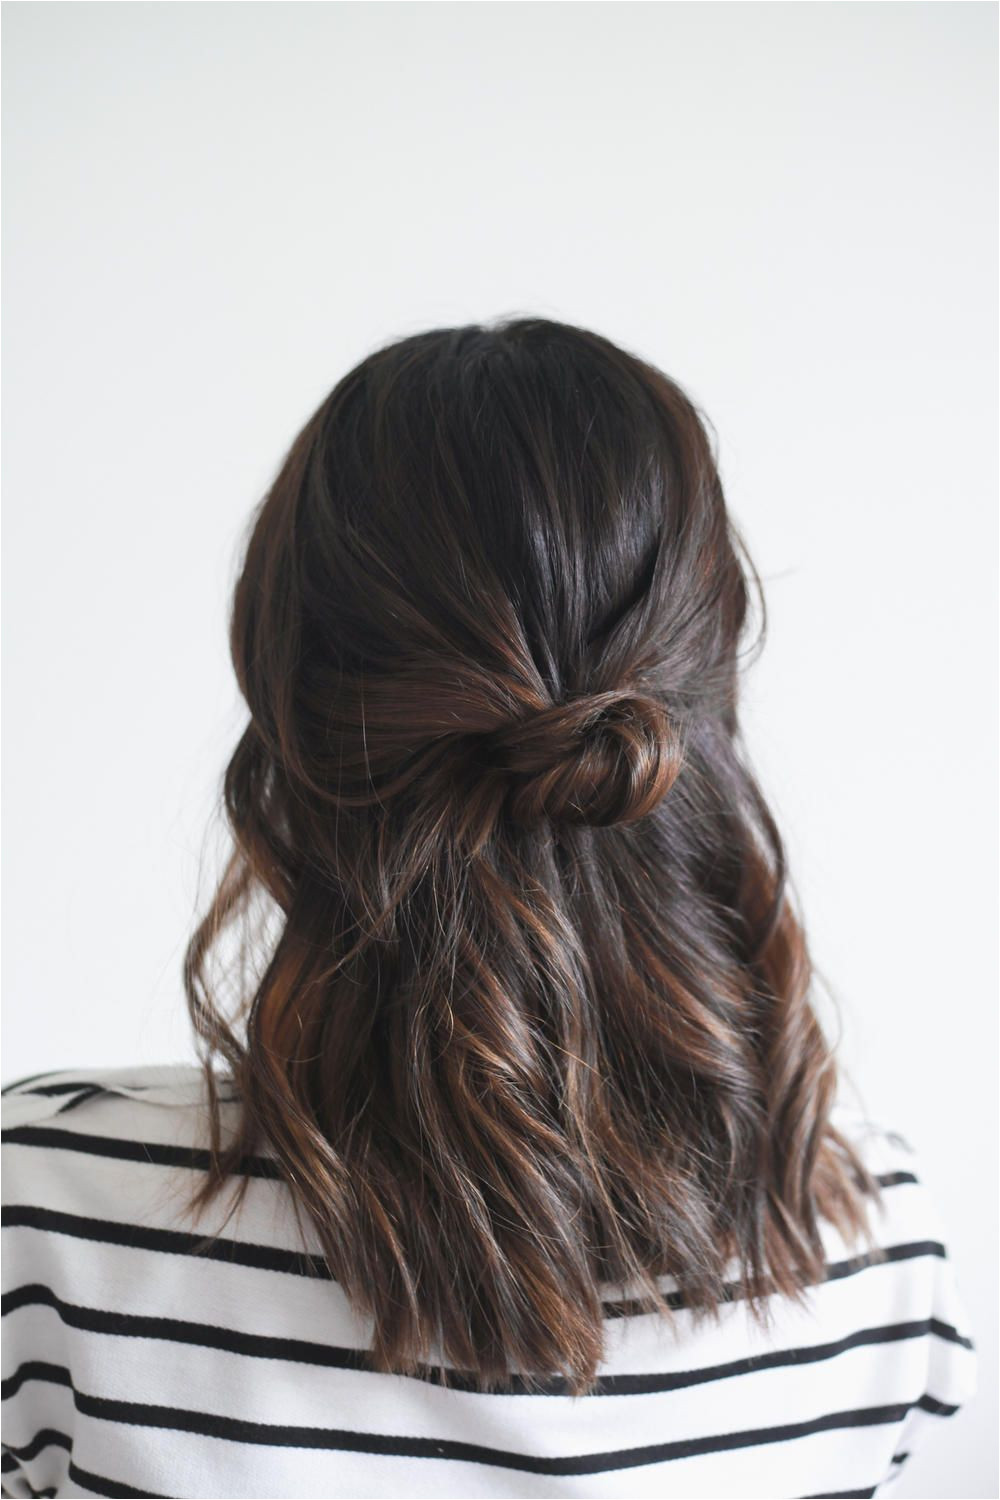 5 simple holiday hairstyles